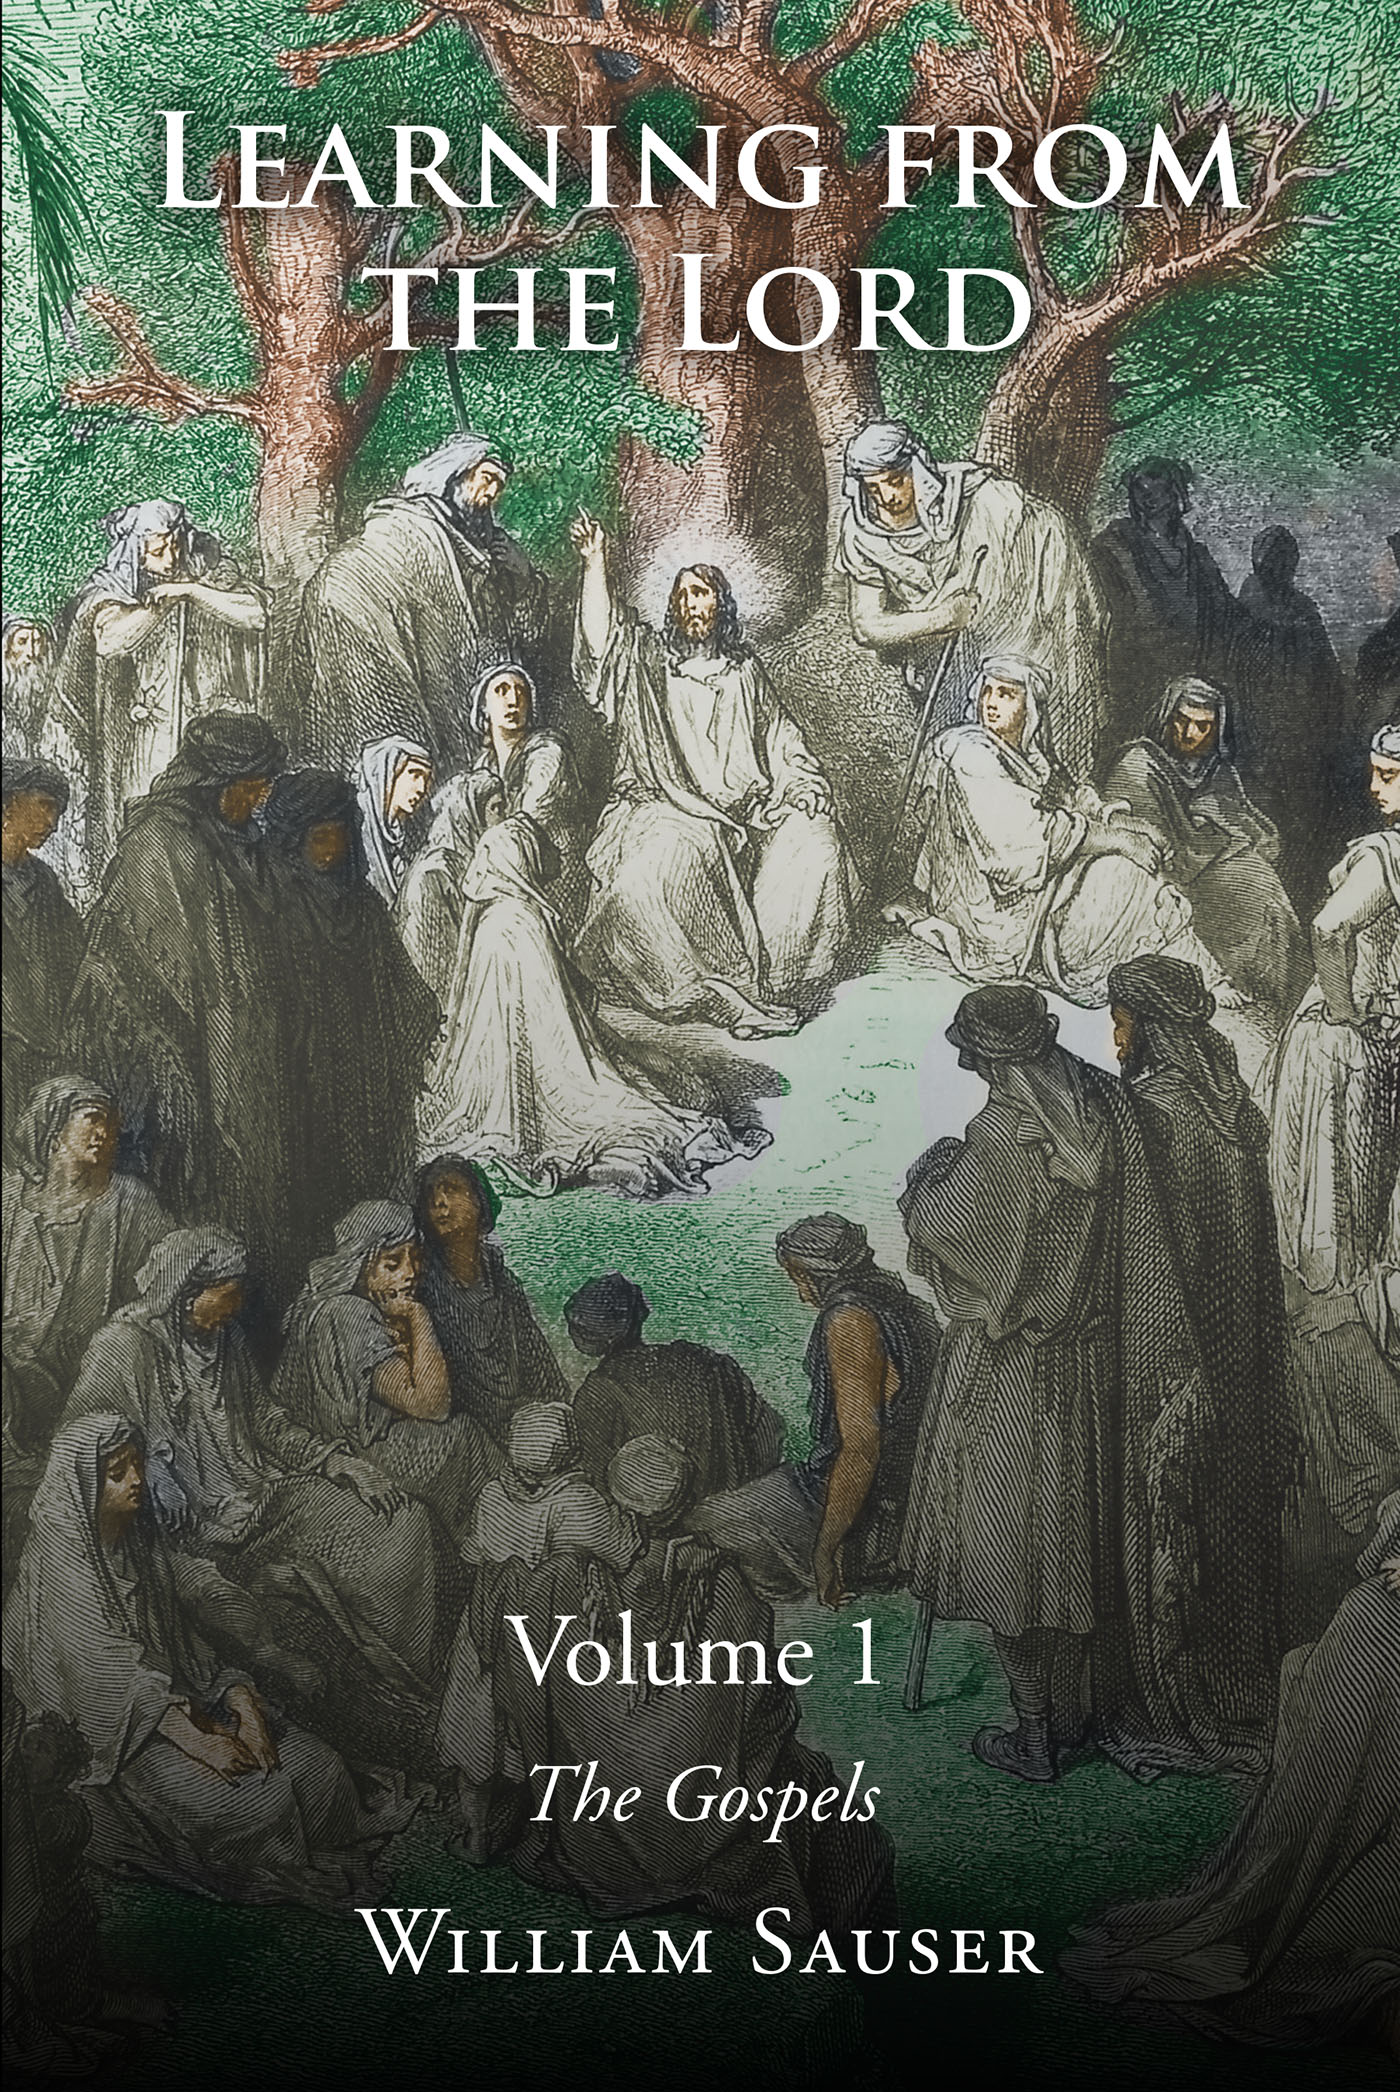 William Sauser’s Newly Released "Learning from the Lord, Volume 1: The Gospels" is an Uplifting Collection of Inspiring Sermons Delivered Over Two Decades